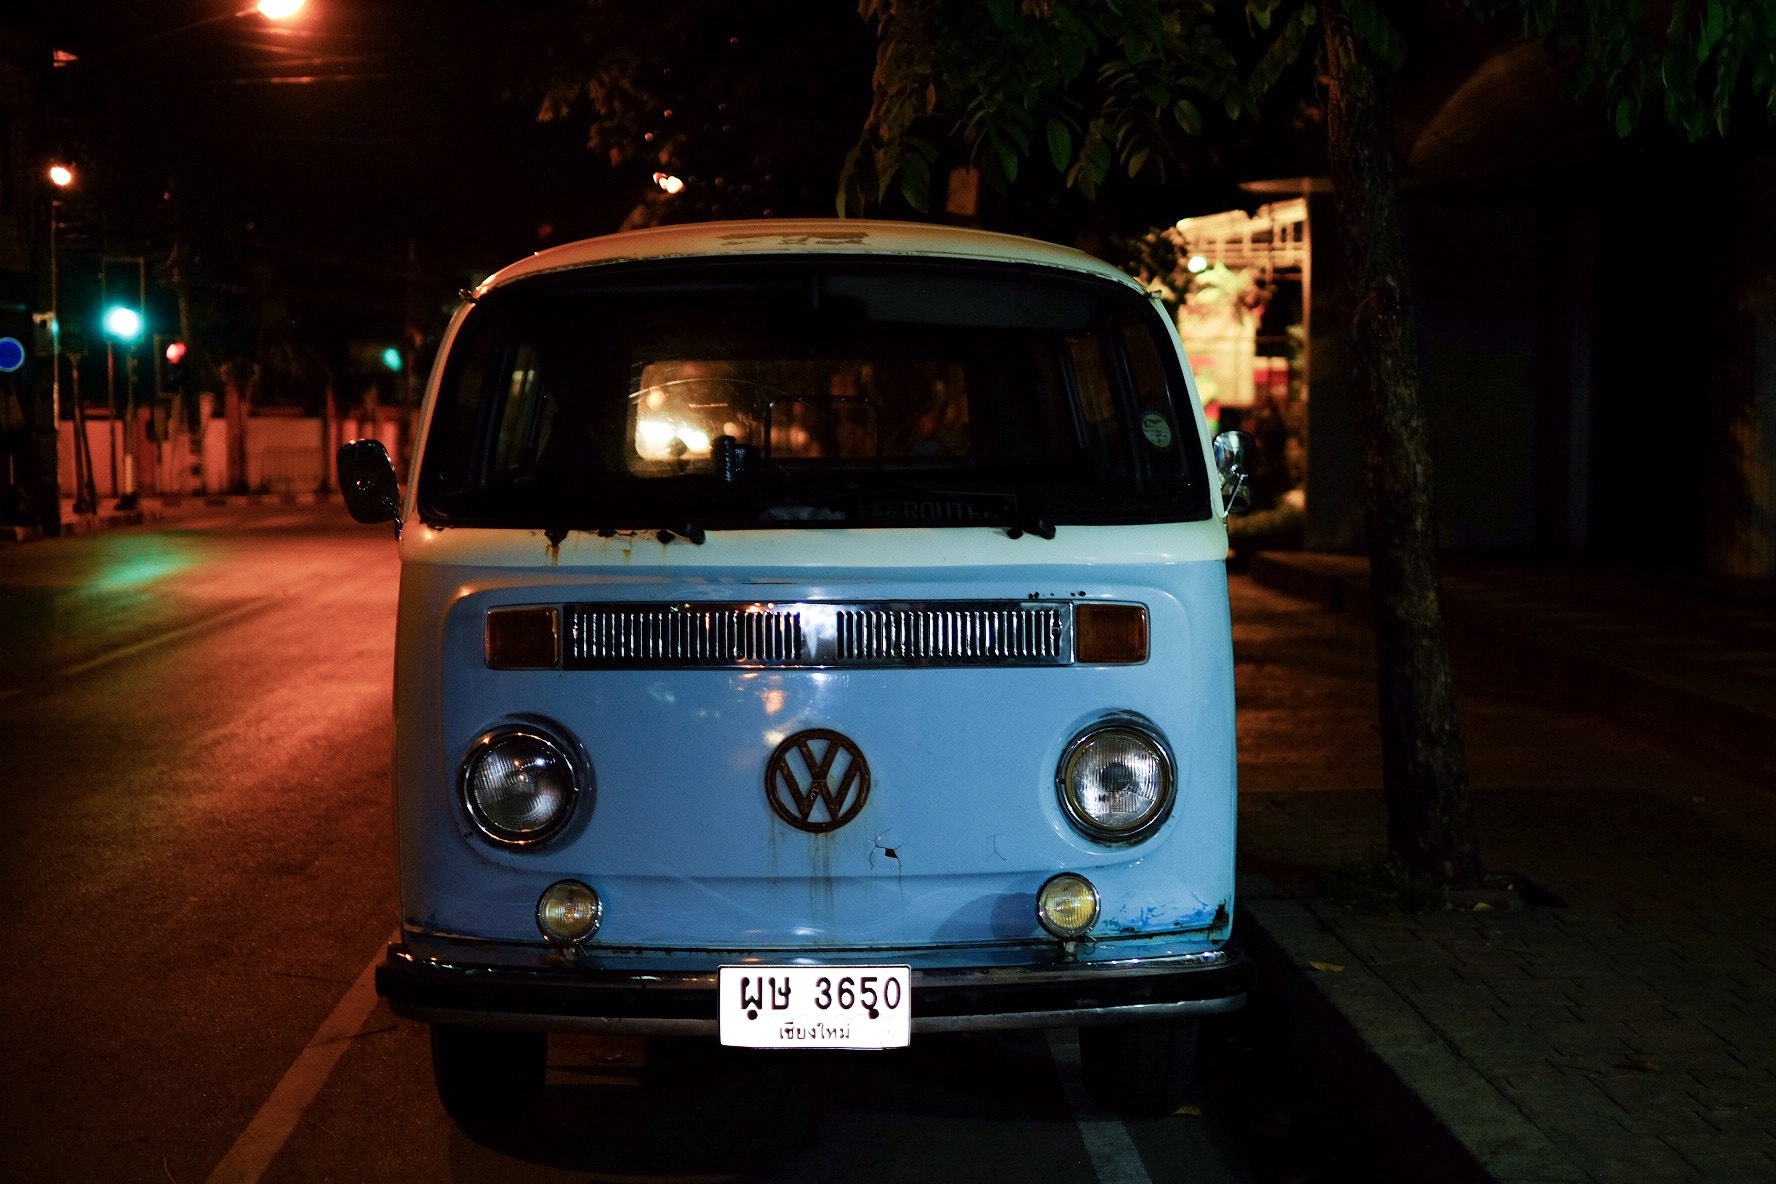 Fujifilm X-T1 sample photo. We were just walking down the streets of chiang mai late at night and spotted this beauty. photography